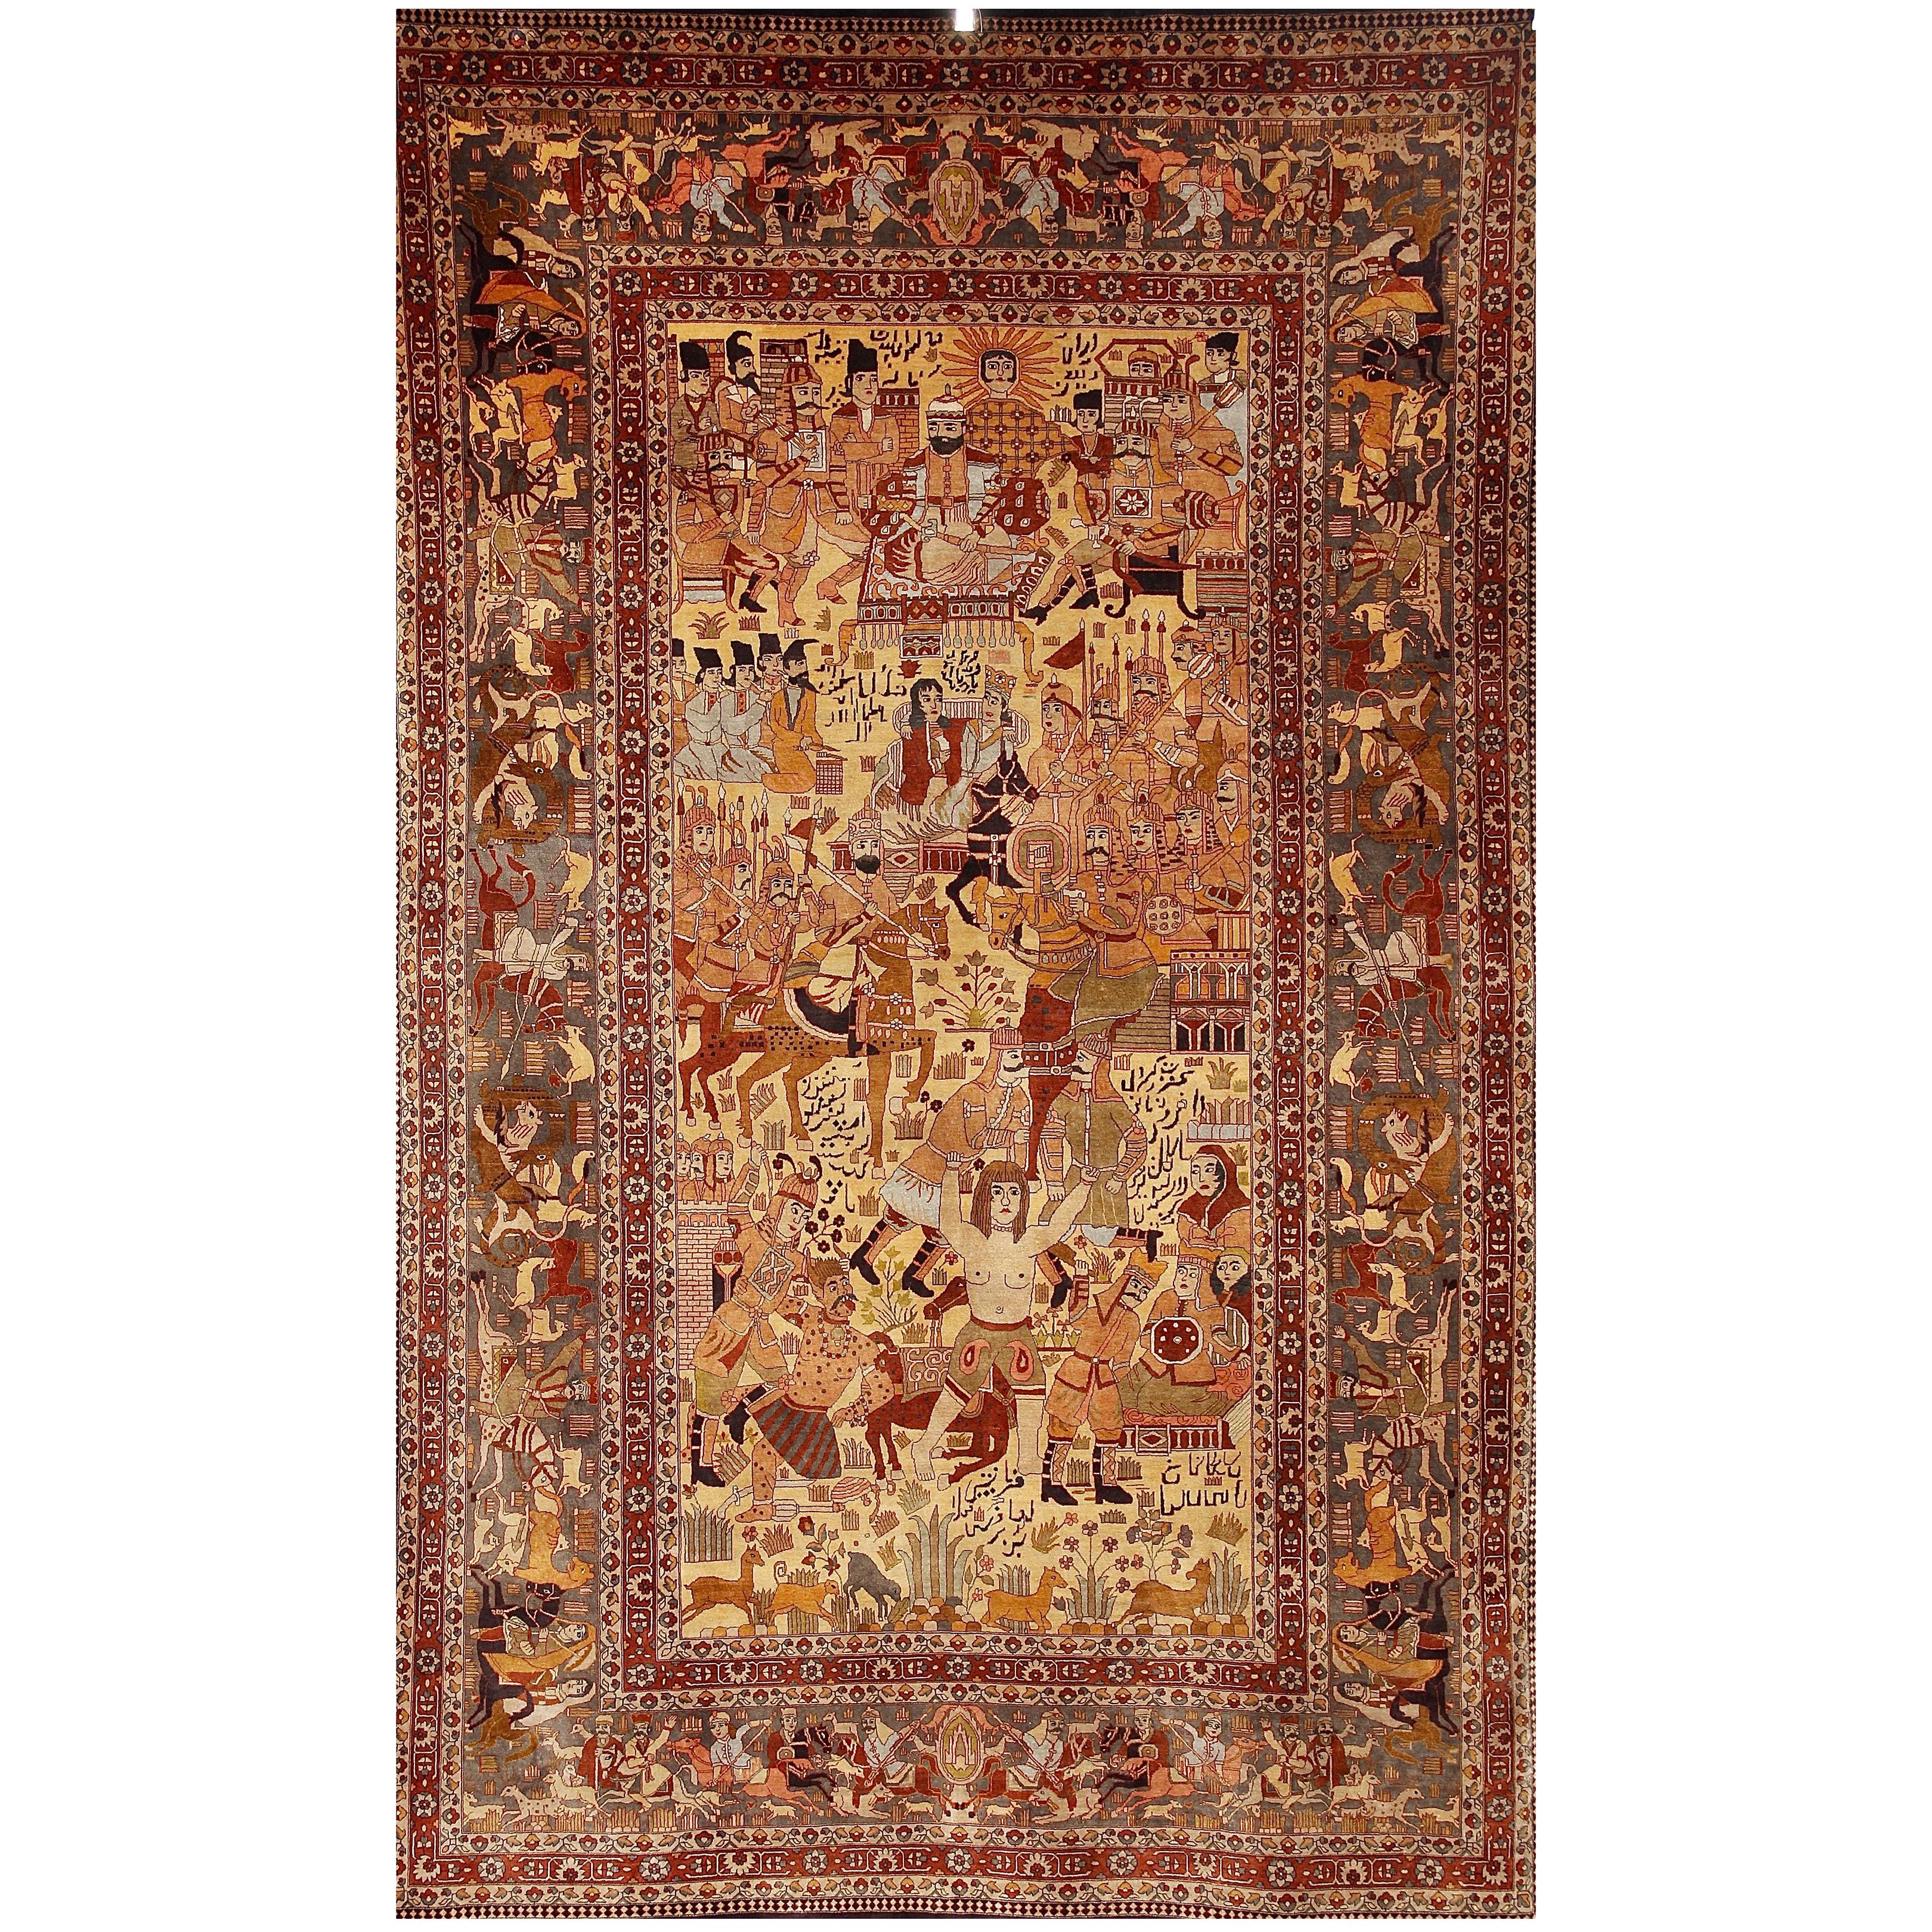 Pictorial Rug 'Tapestry' Carpet, Hand-Knotted, Bridal Couple, Generals, Poets For Sale